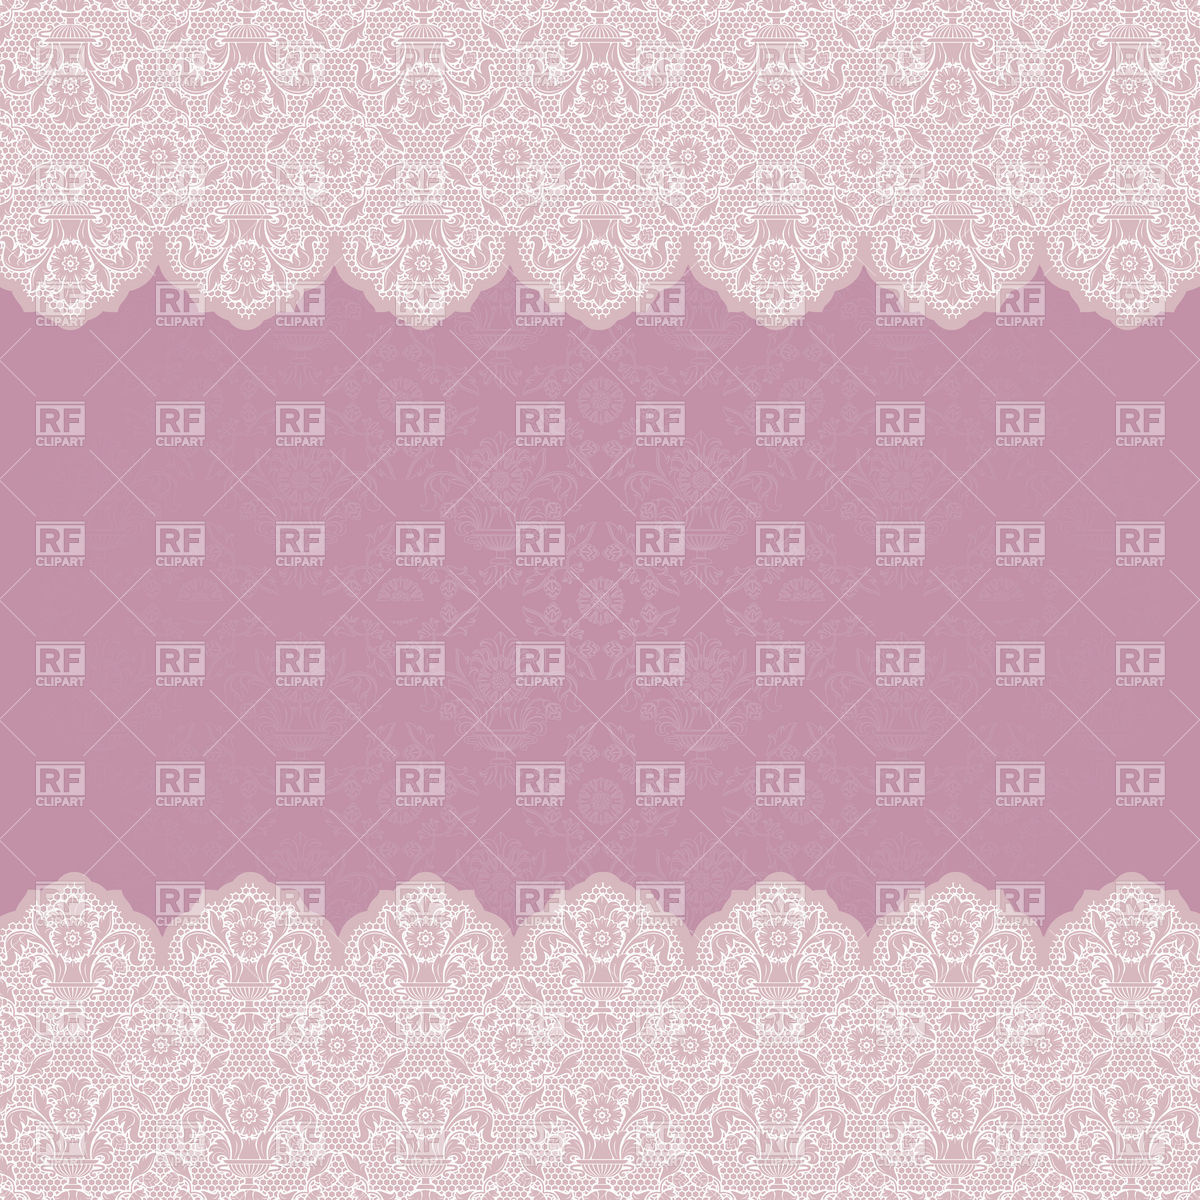 Lilac Vintage Wallpaper With Lacy Border Download Royalty Free Vector